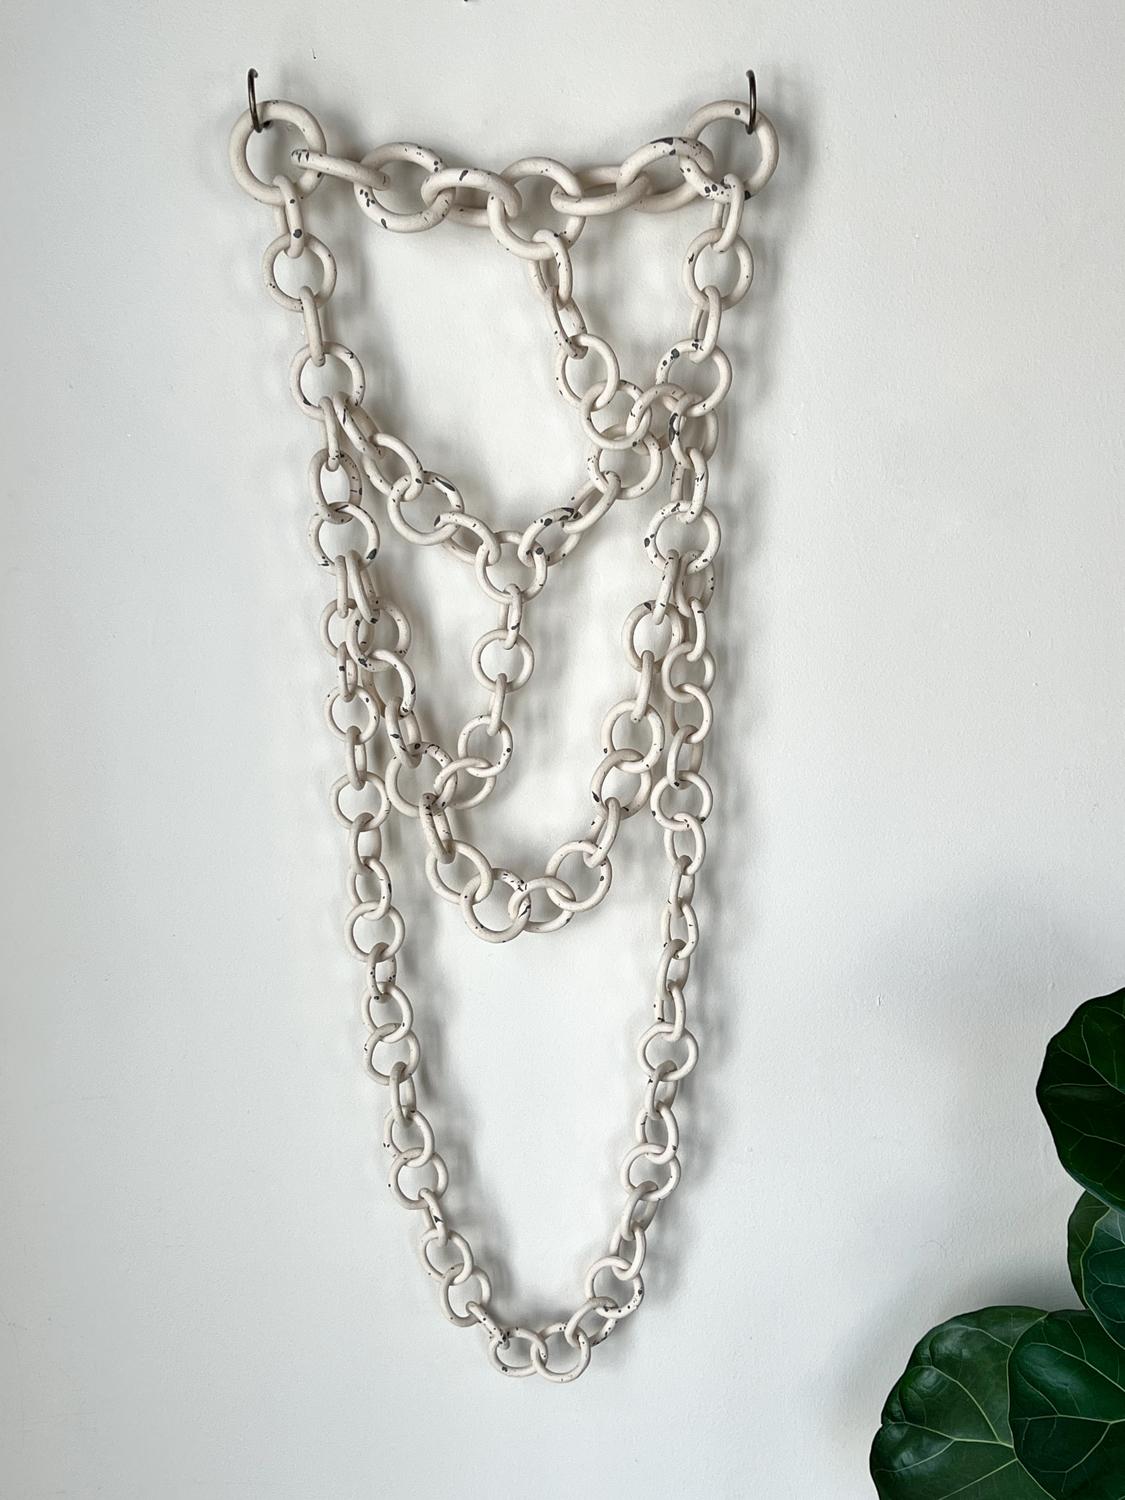 white Ceramic Link Chain Wall Sculpture 5